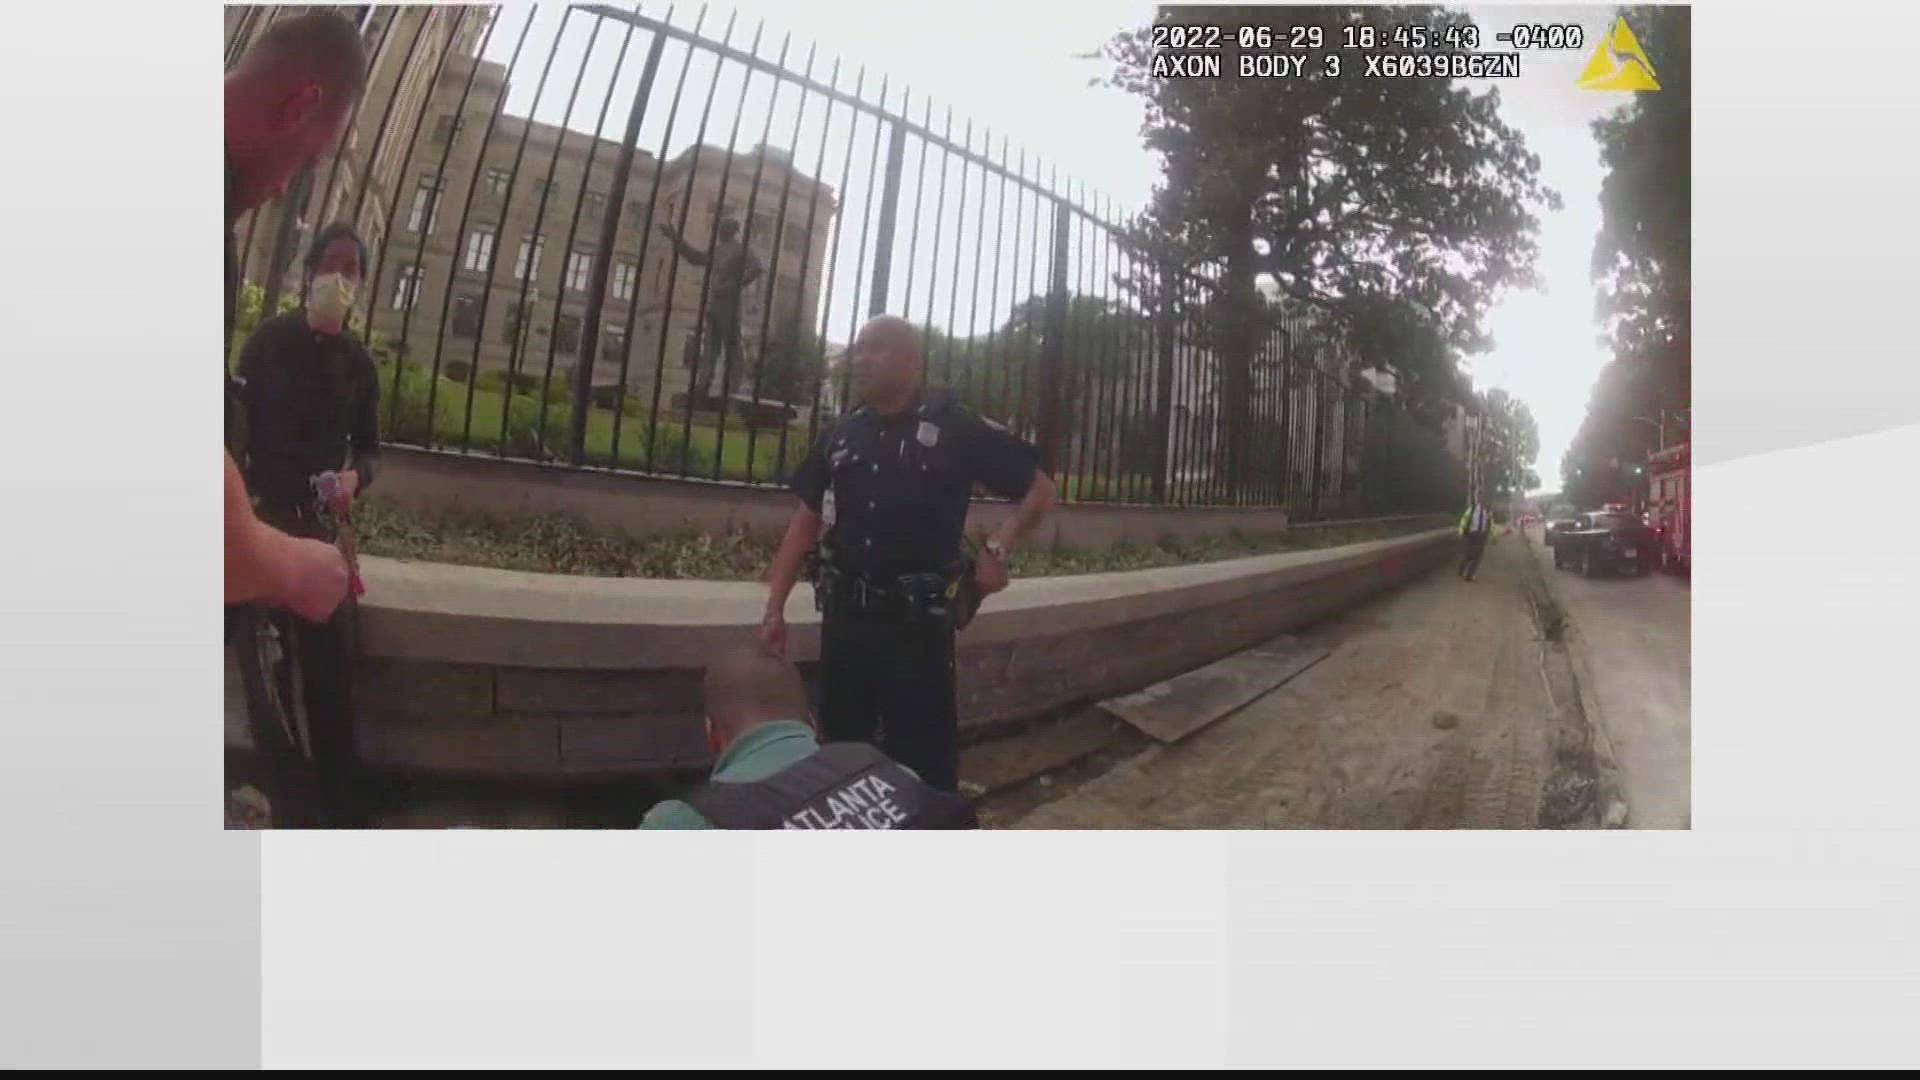 Video from an APD officer's body camera shows the incident unfolding on a street outside the State Capitol building.